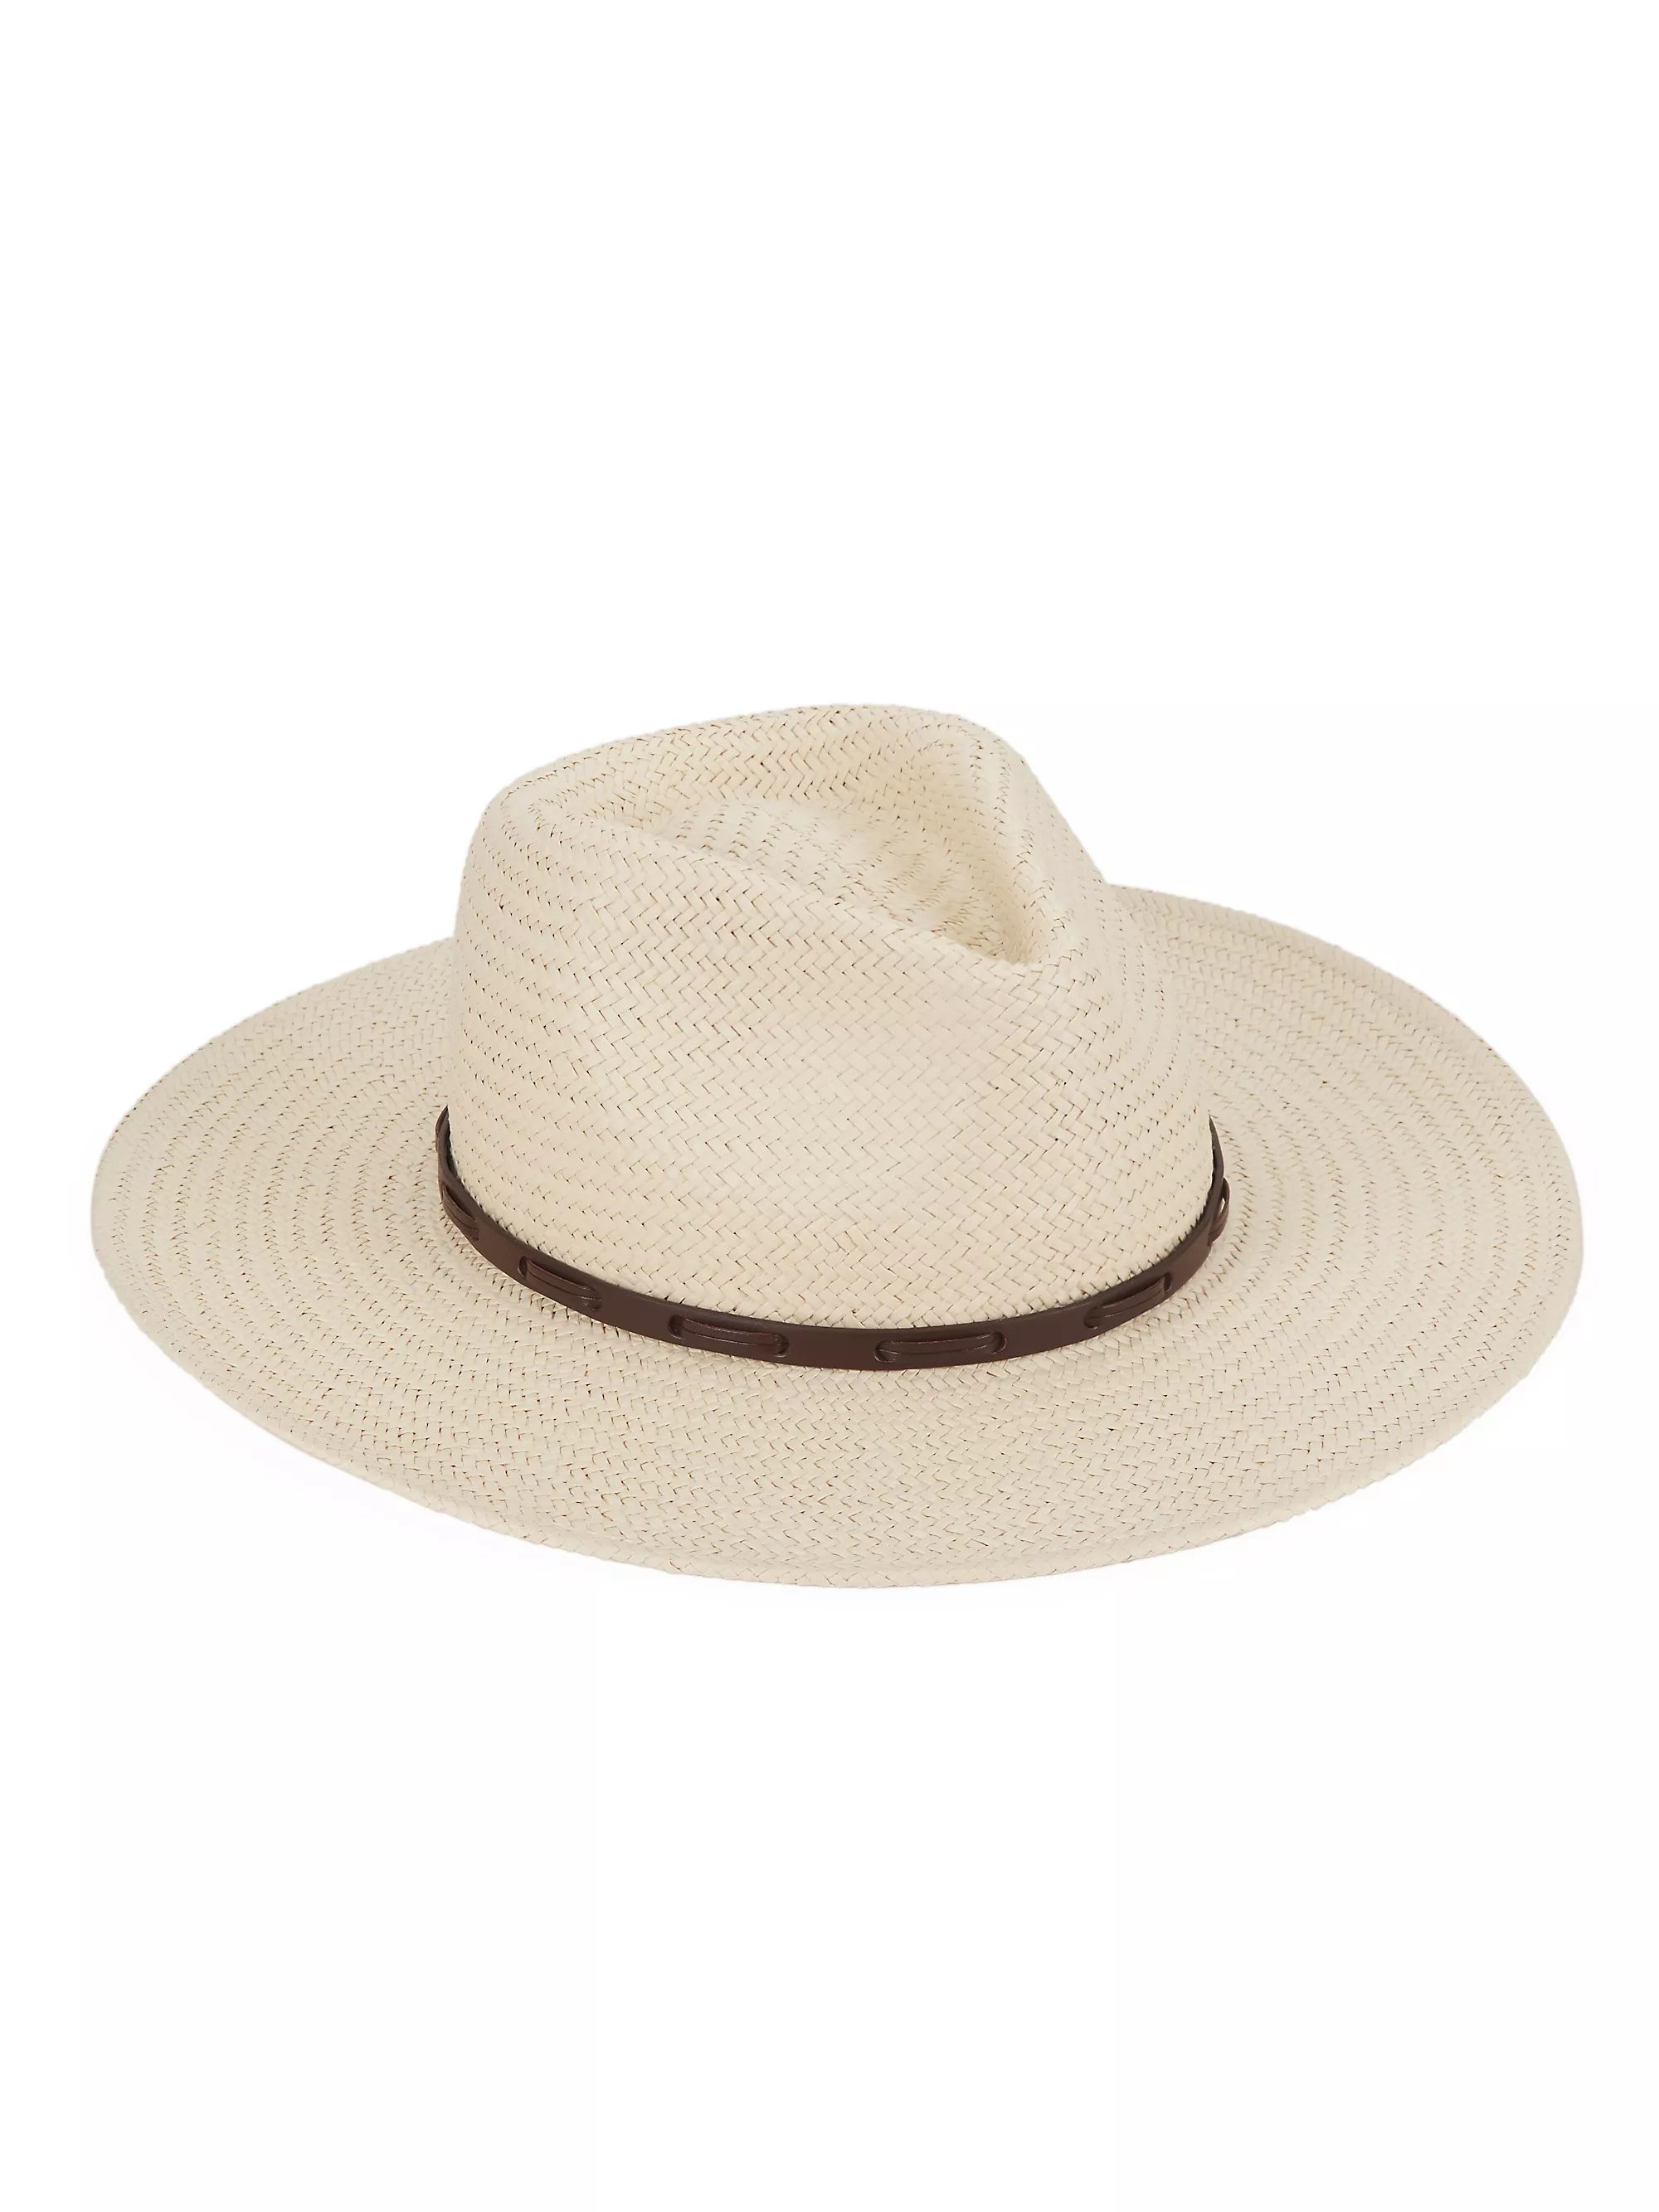 Lexie Packable Straw Fedora | Saks Fifth Avenue